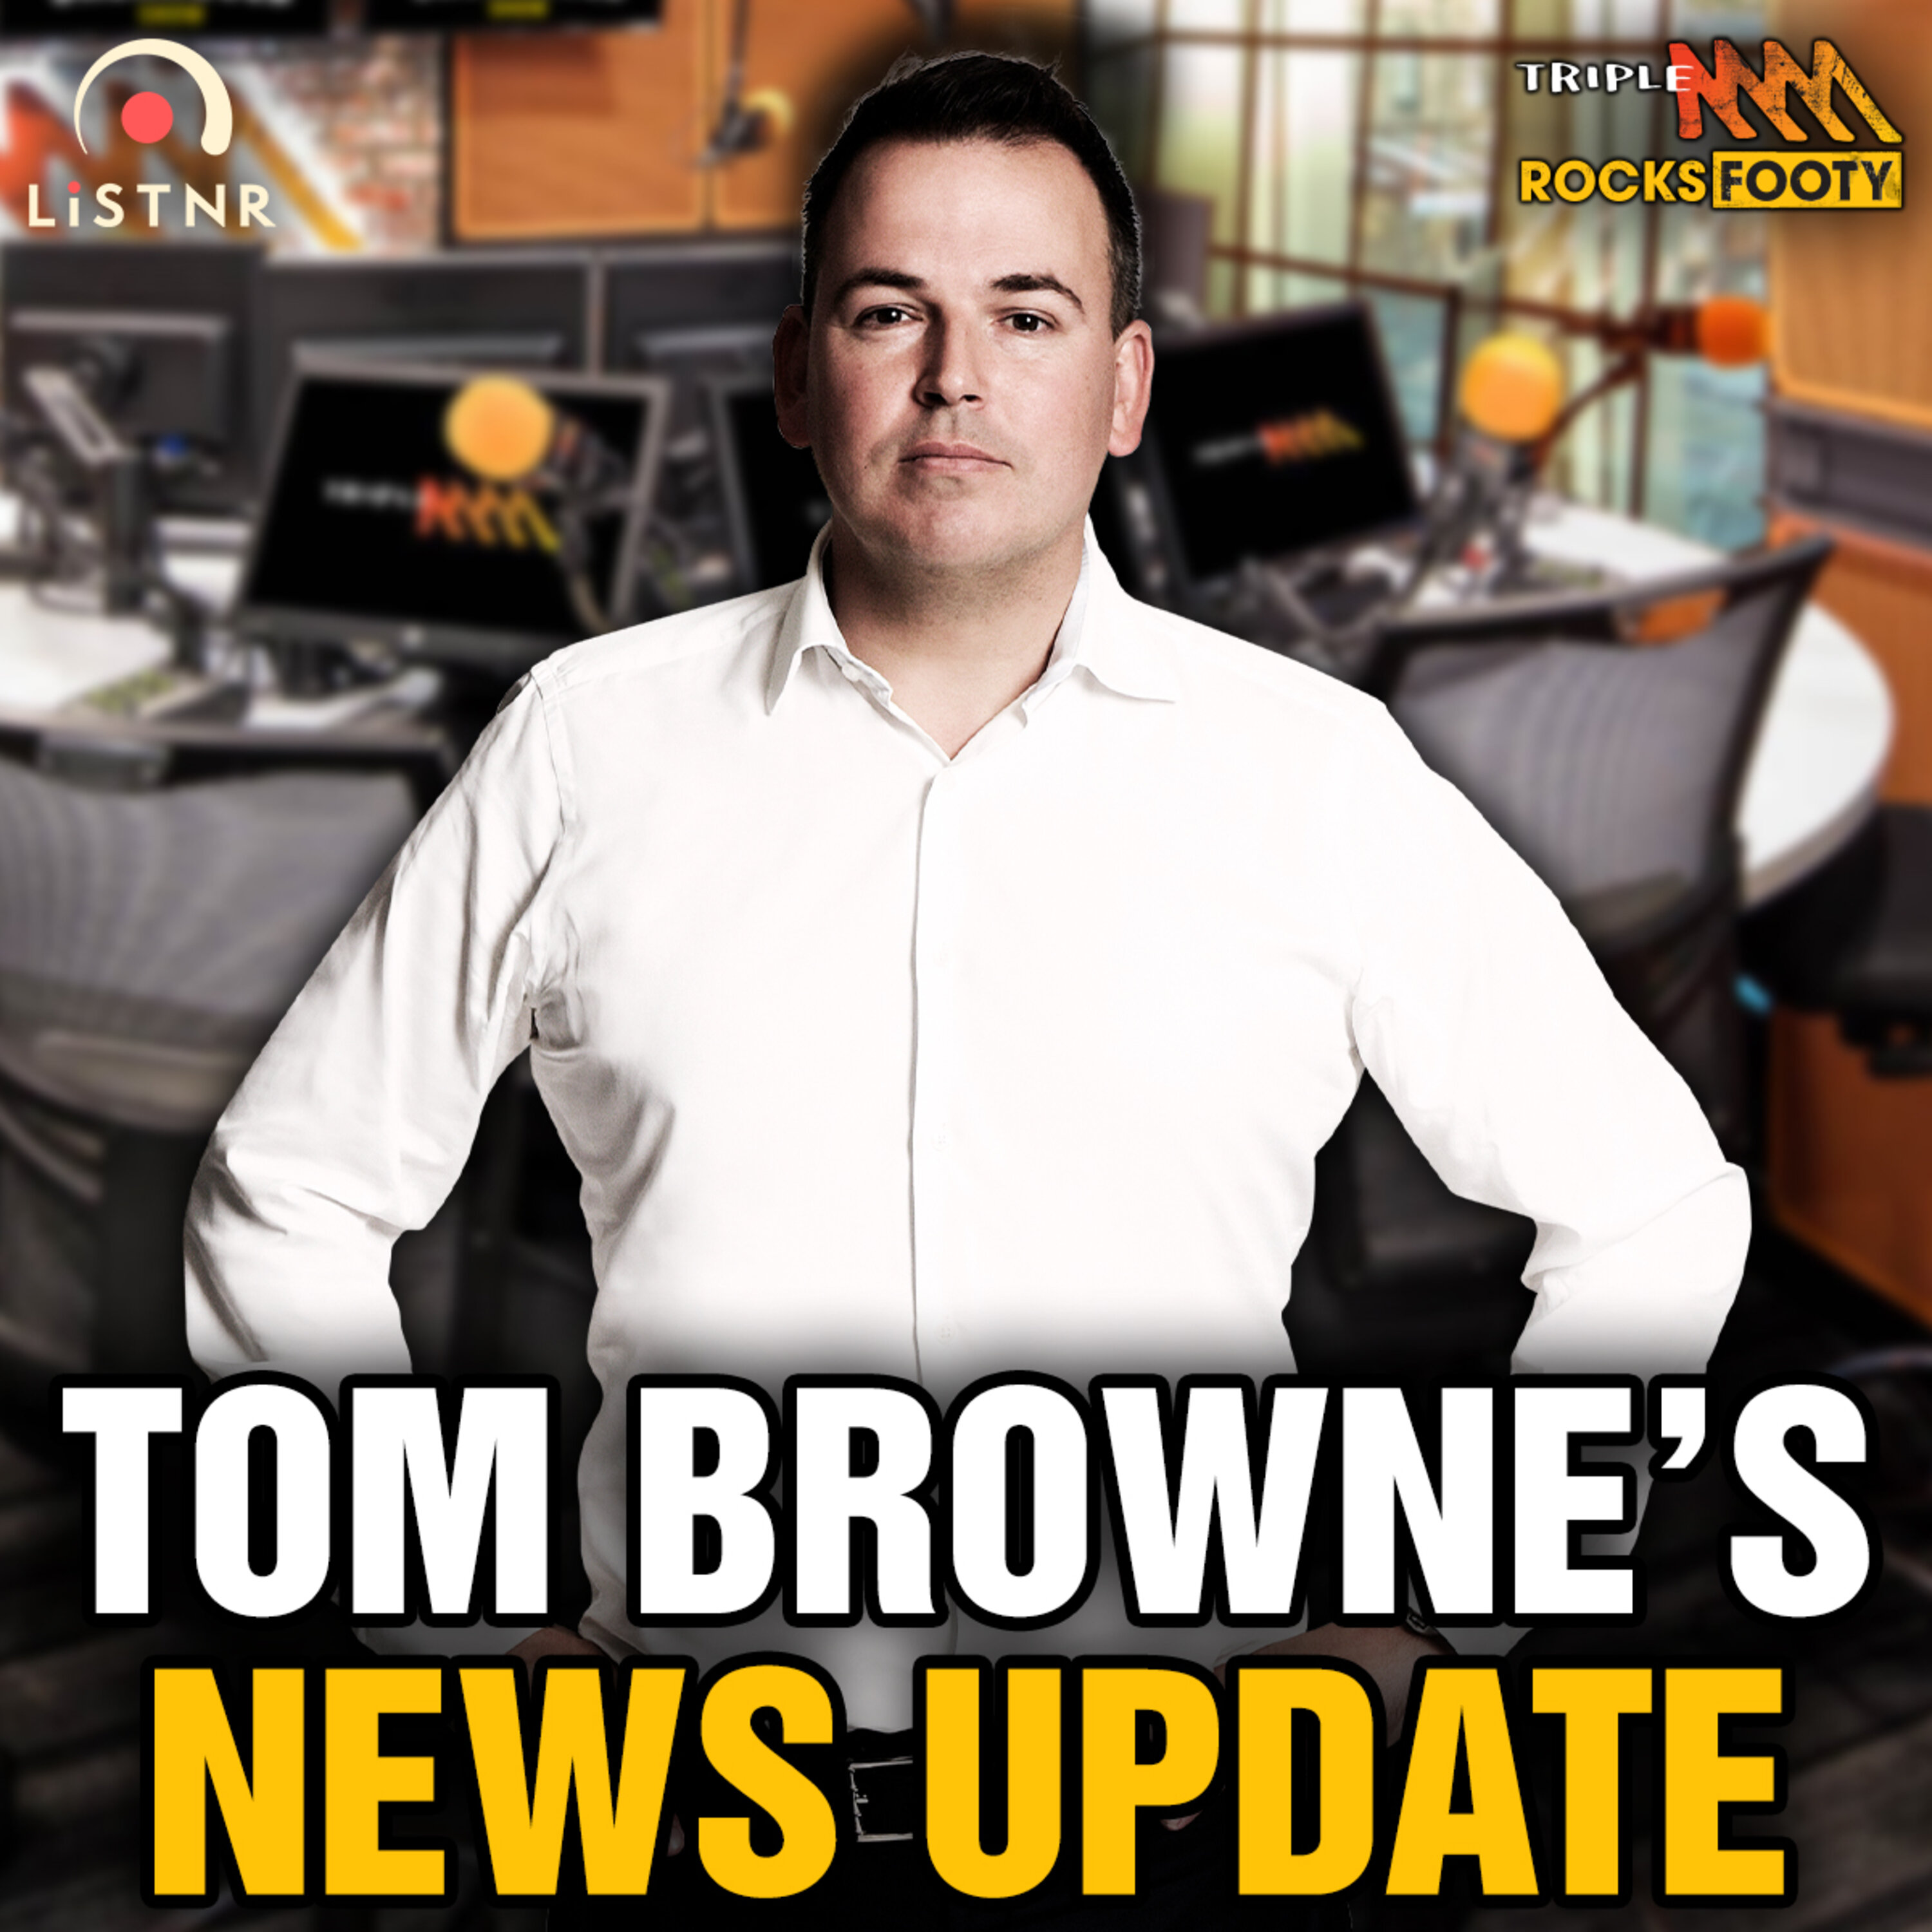 Tom Browne's News | Leon Cameron steps down, most likely candidates, pressure on rival clubs